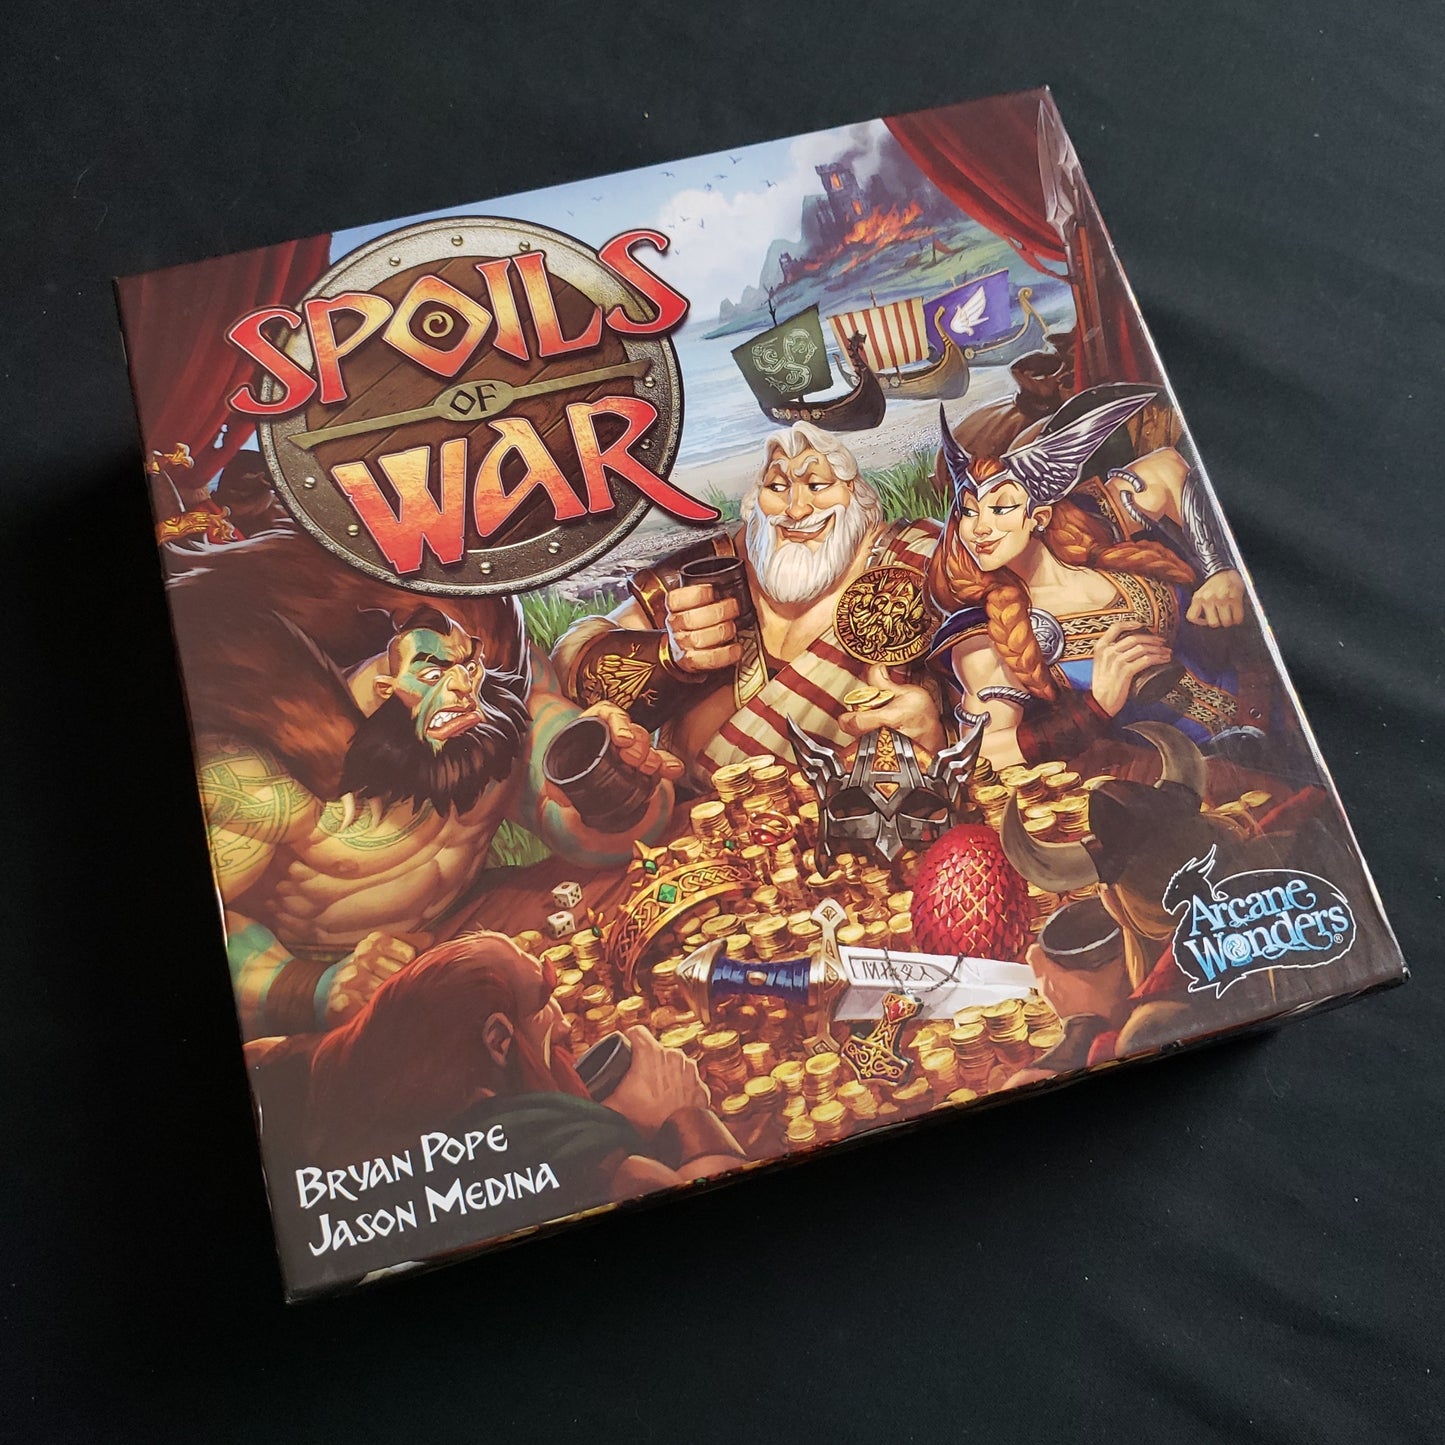 Image shows the front cover of the box of the Spoils Of War board game